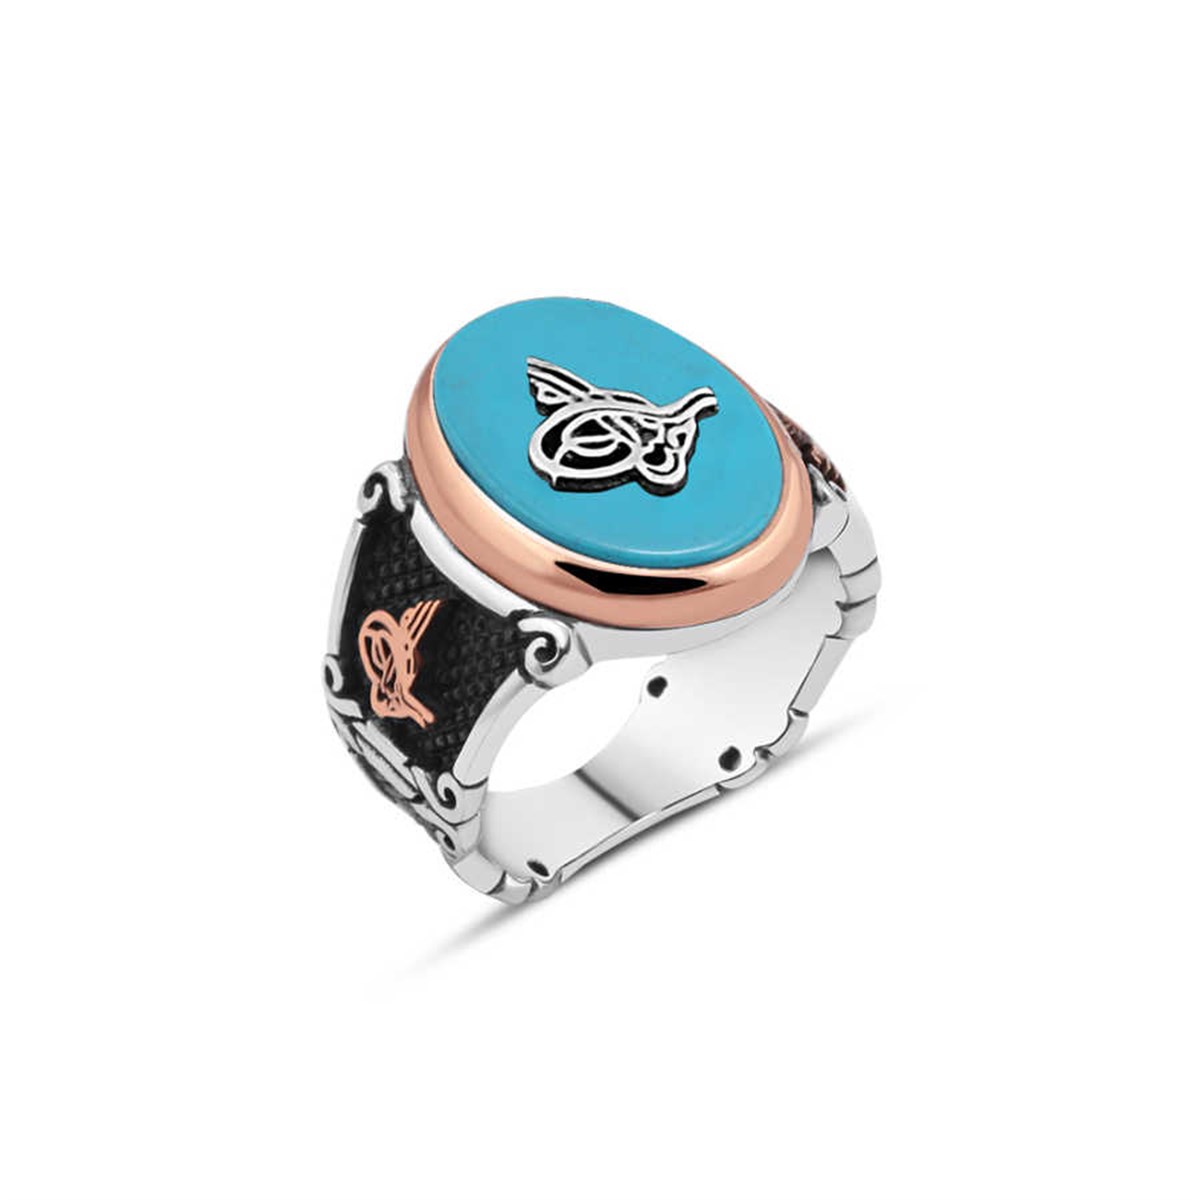 Turquoise Stone Tugra Men's Ring in Sterling Silver